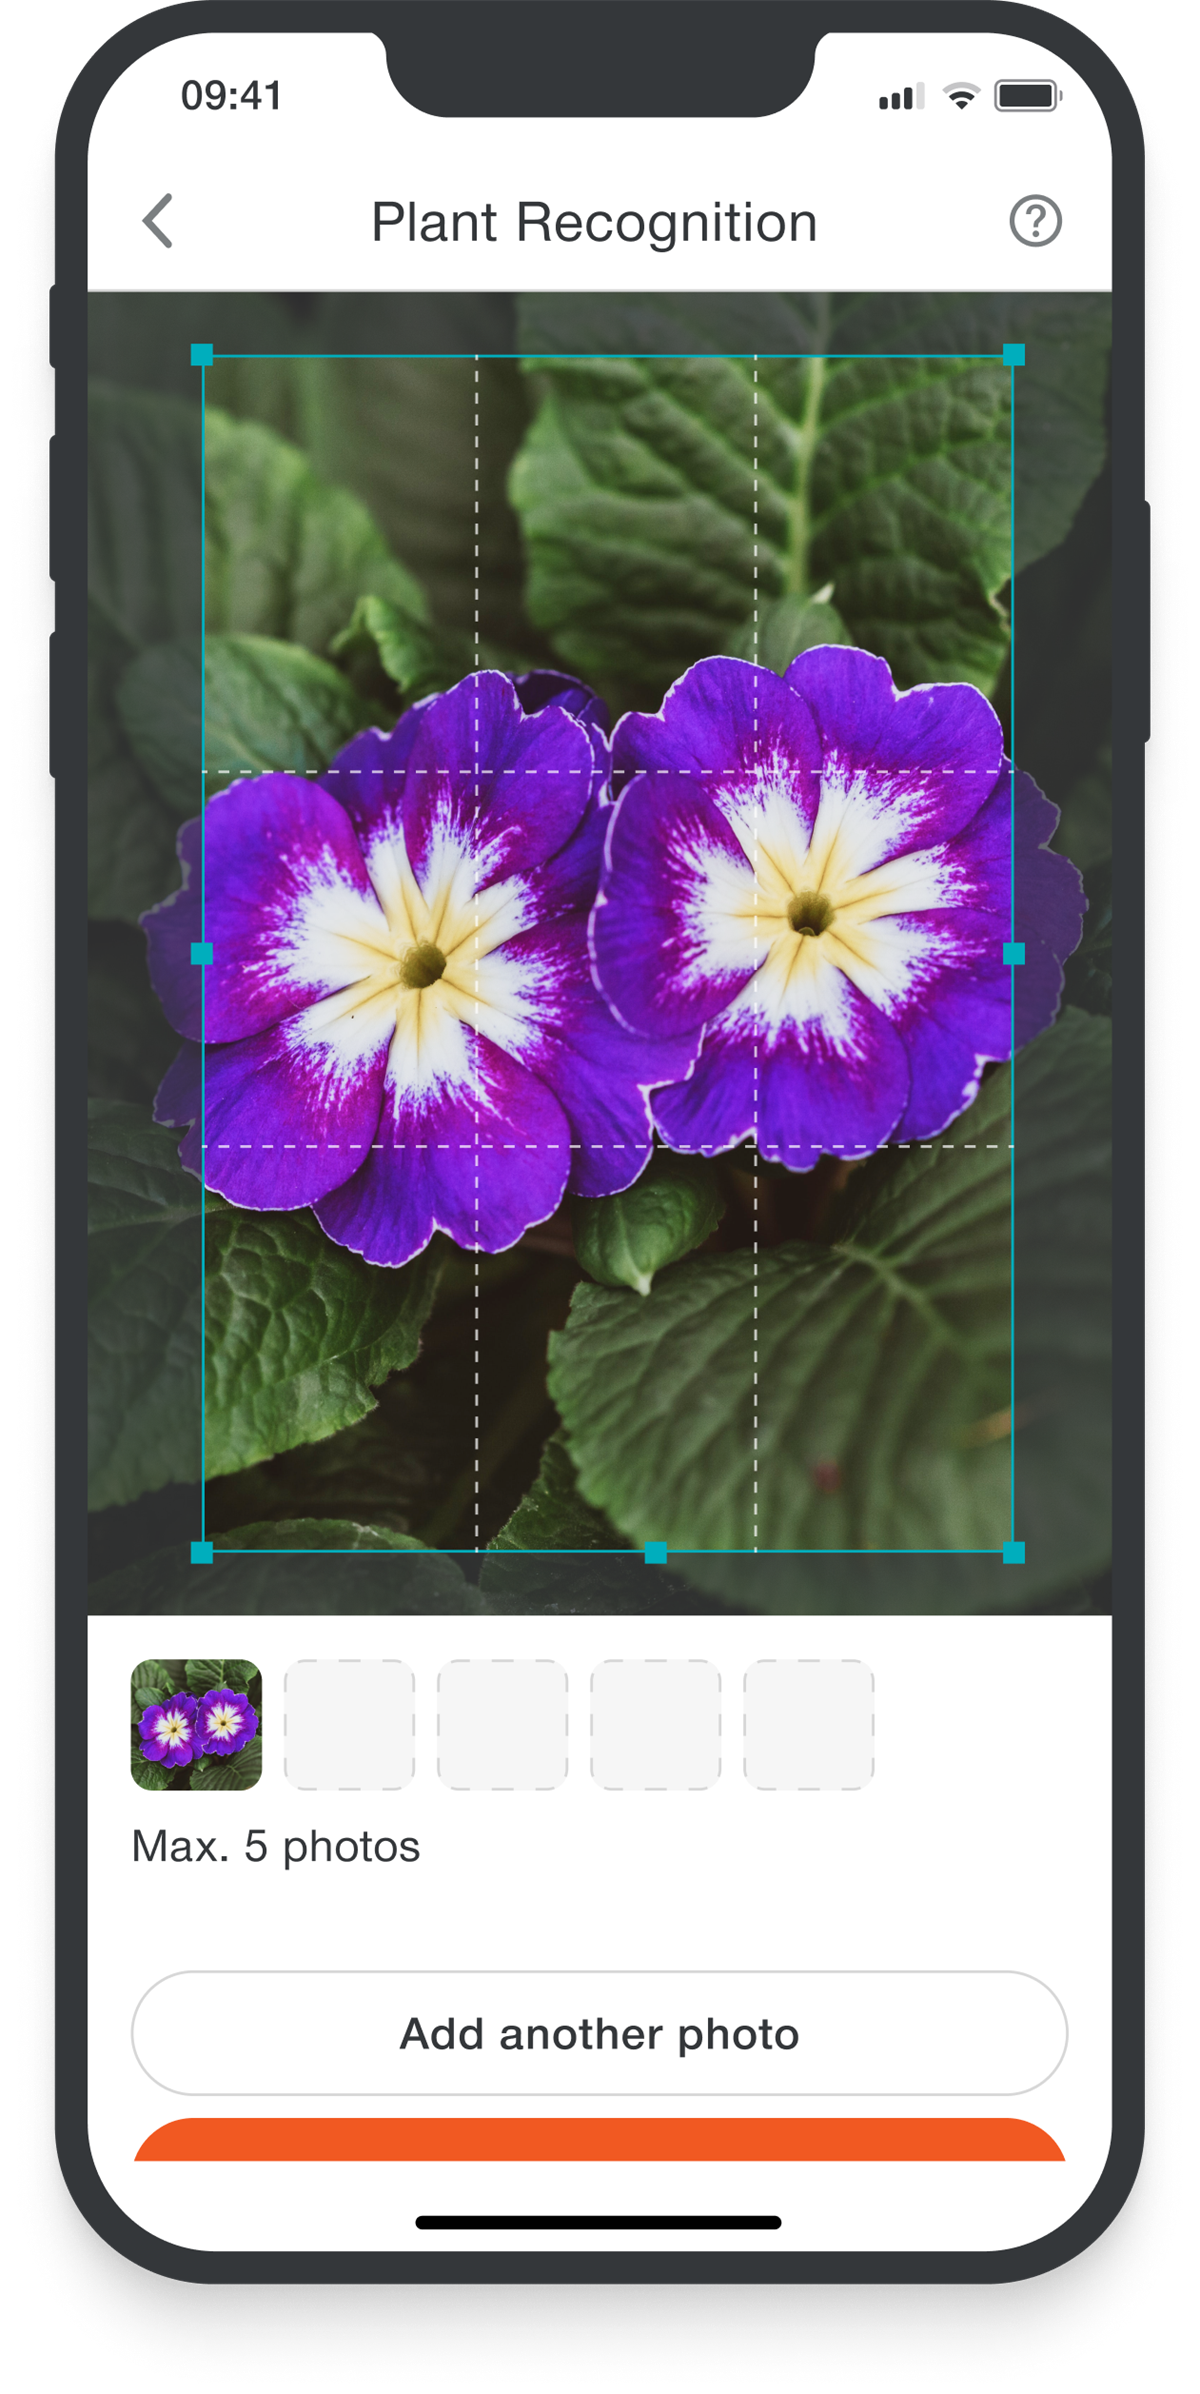 Via photo upload, garden owners can now identify plants unknown to them with one click